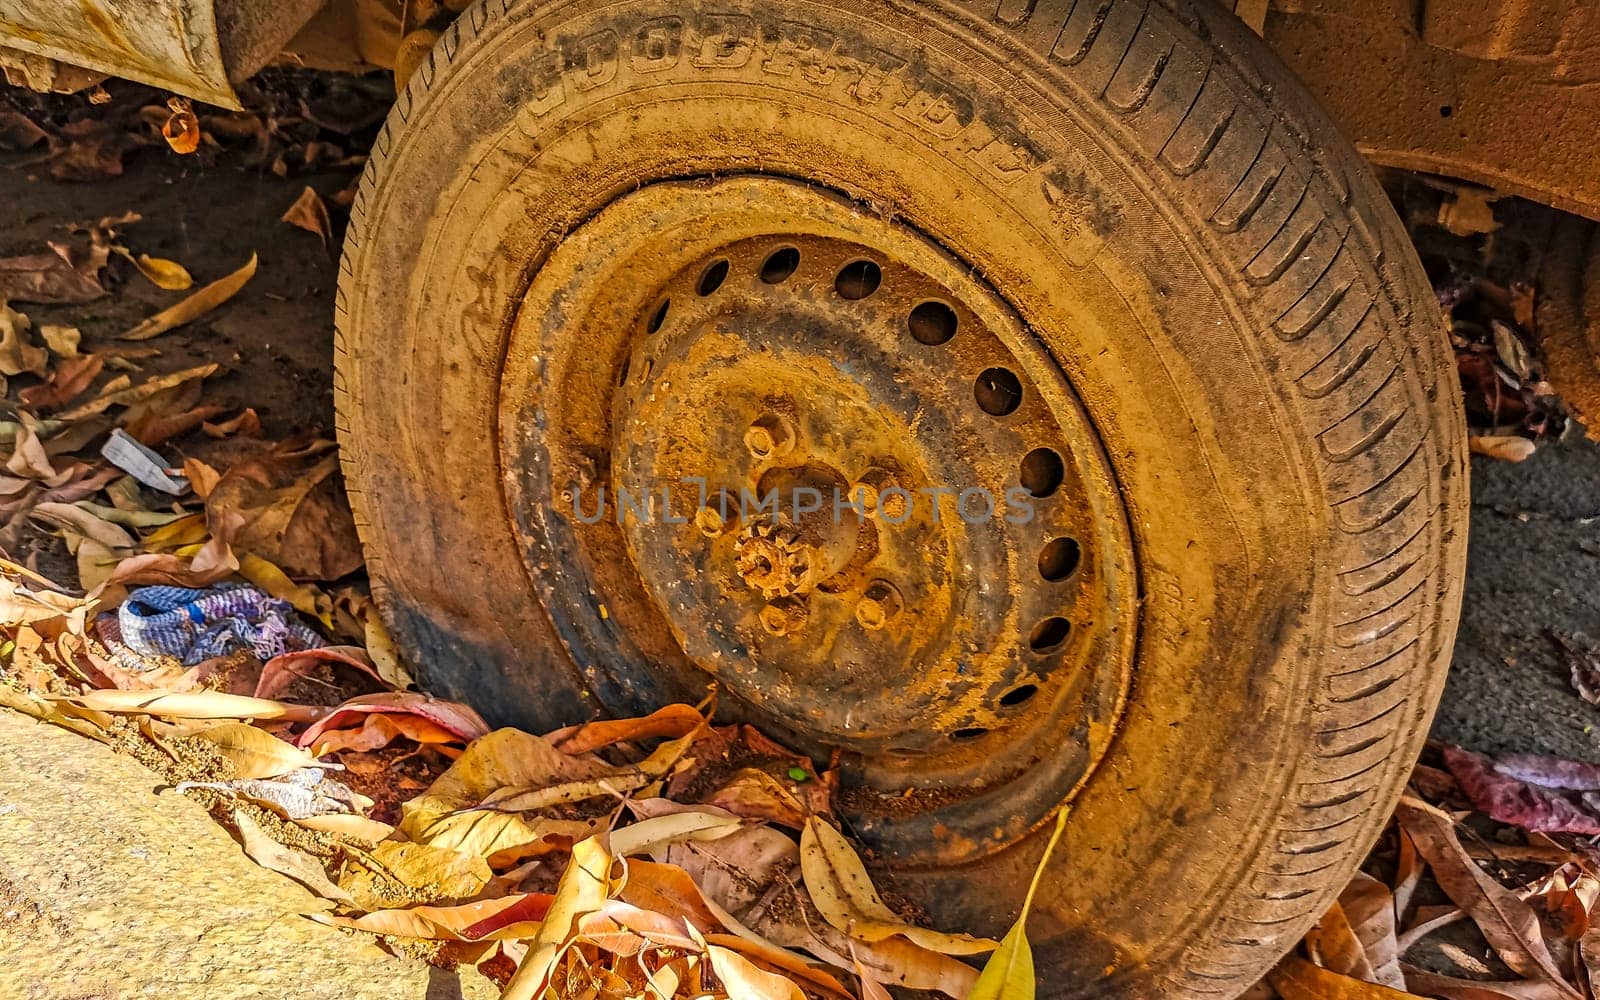 Flat rusted old tire on the car in Zicatela Puerto Escondido Oaxaca Mexico.